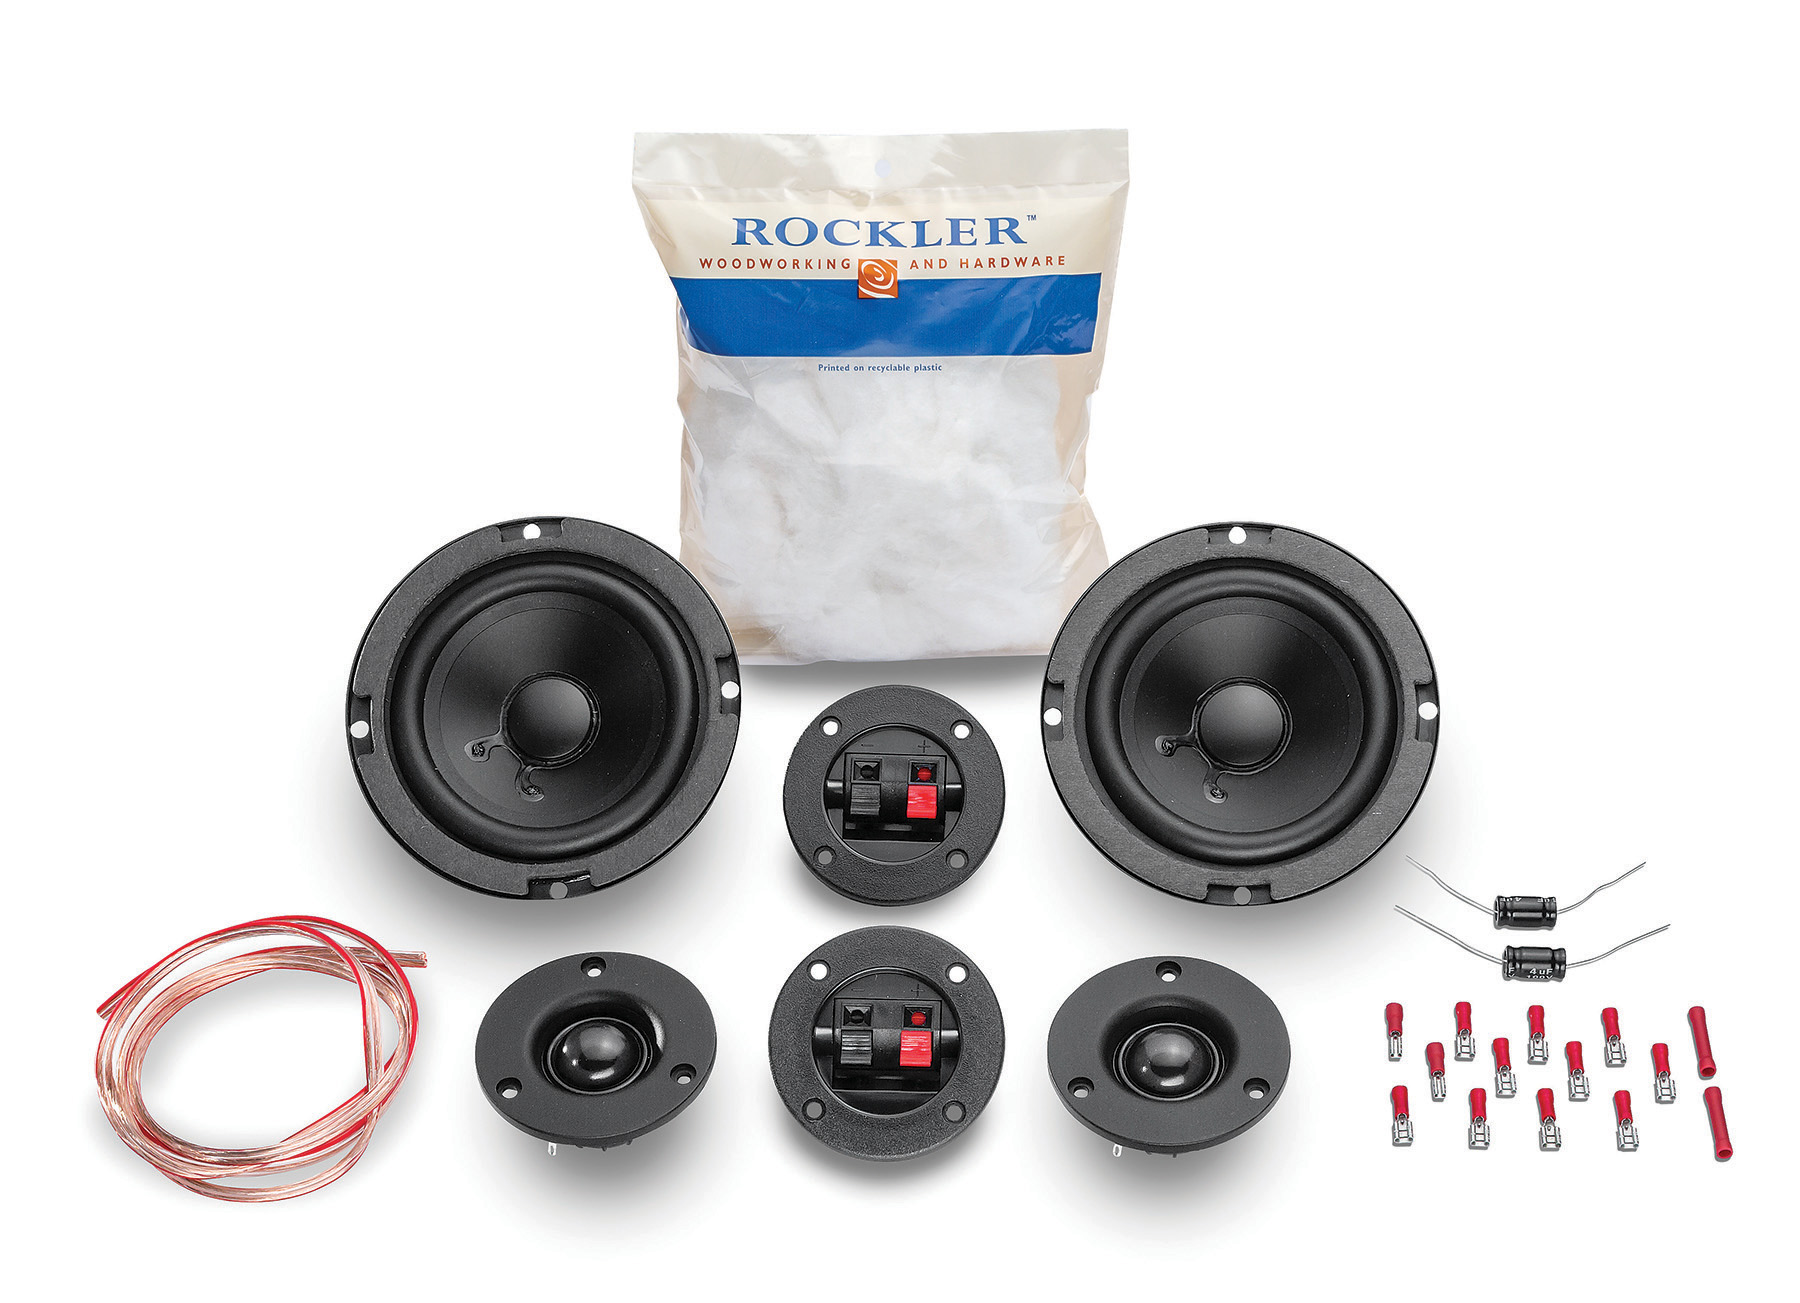 The 5" DIY Speaker kit - everything you need except for the speaker box material.